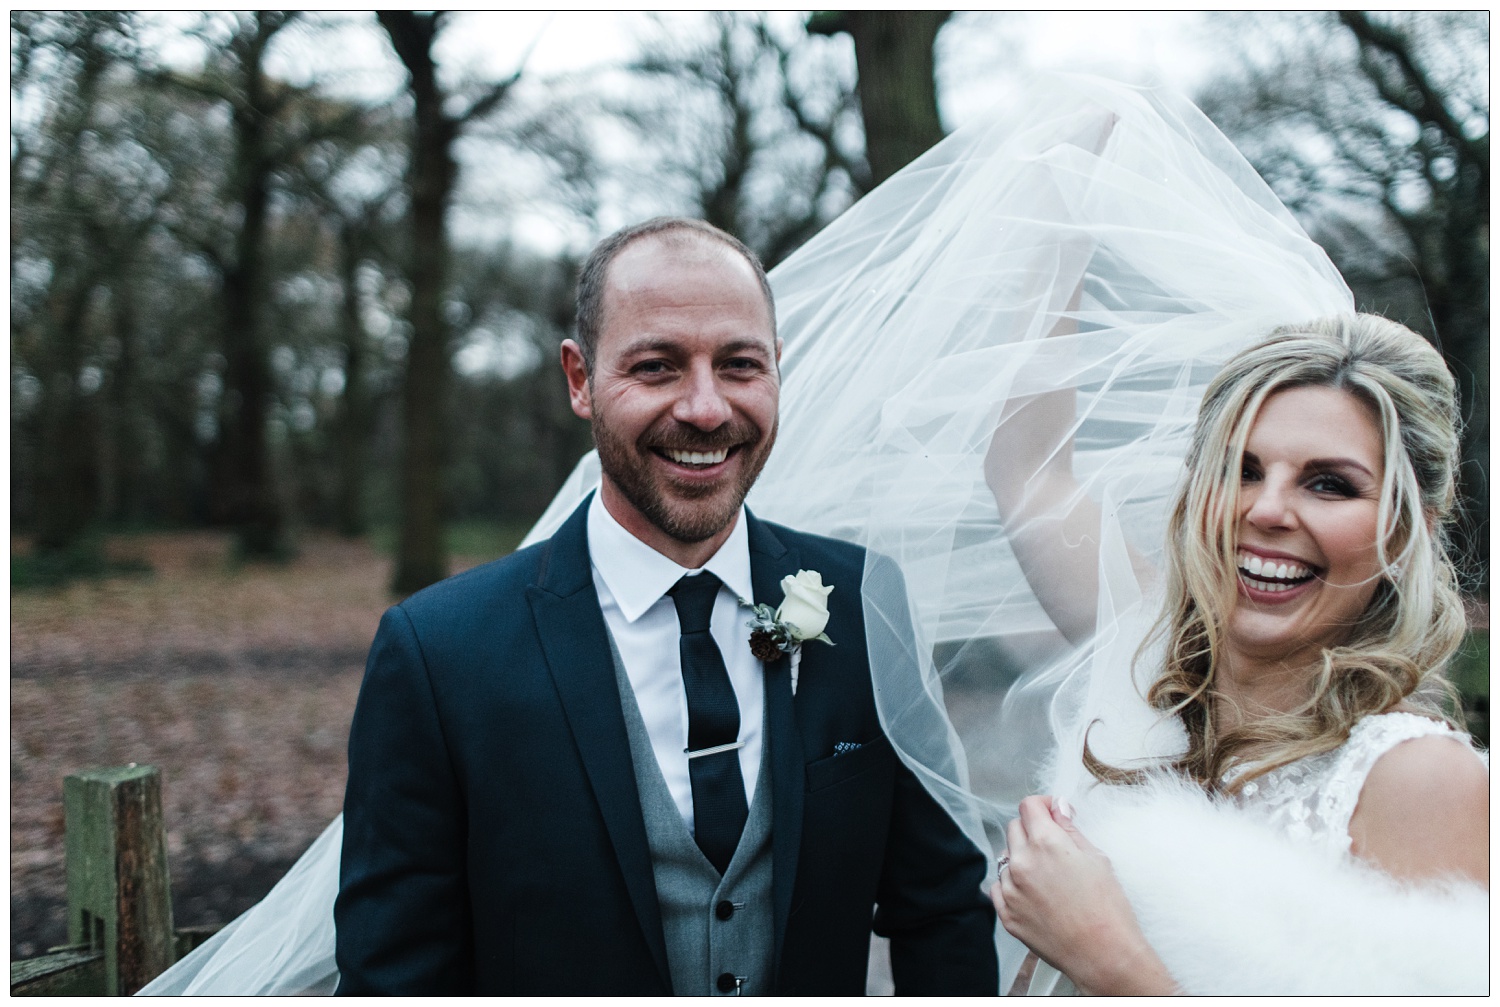 Bride and groom in a photograph in Hockley woods in December. The wind is blowing the brides veil and it's starting to get dark..